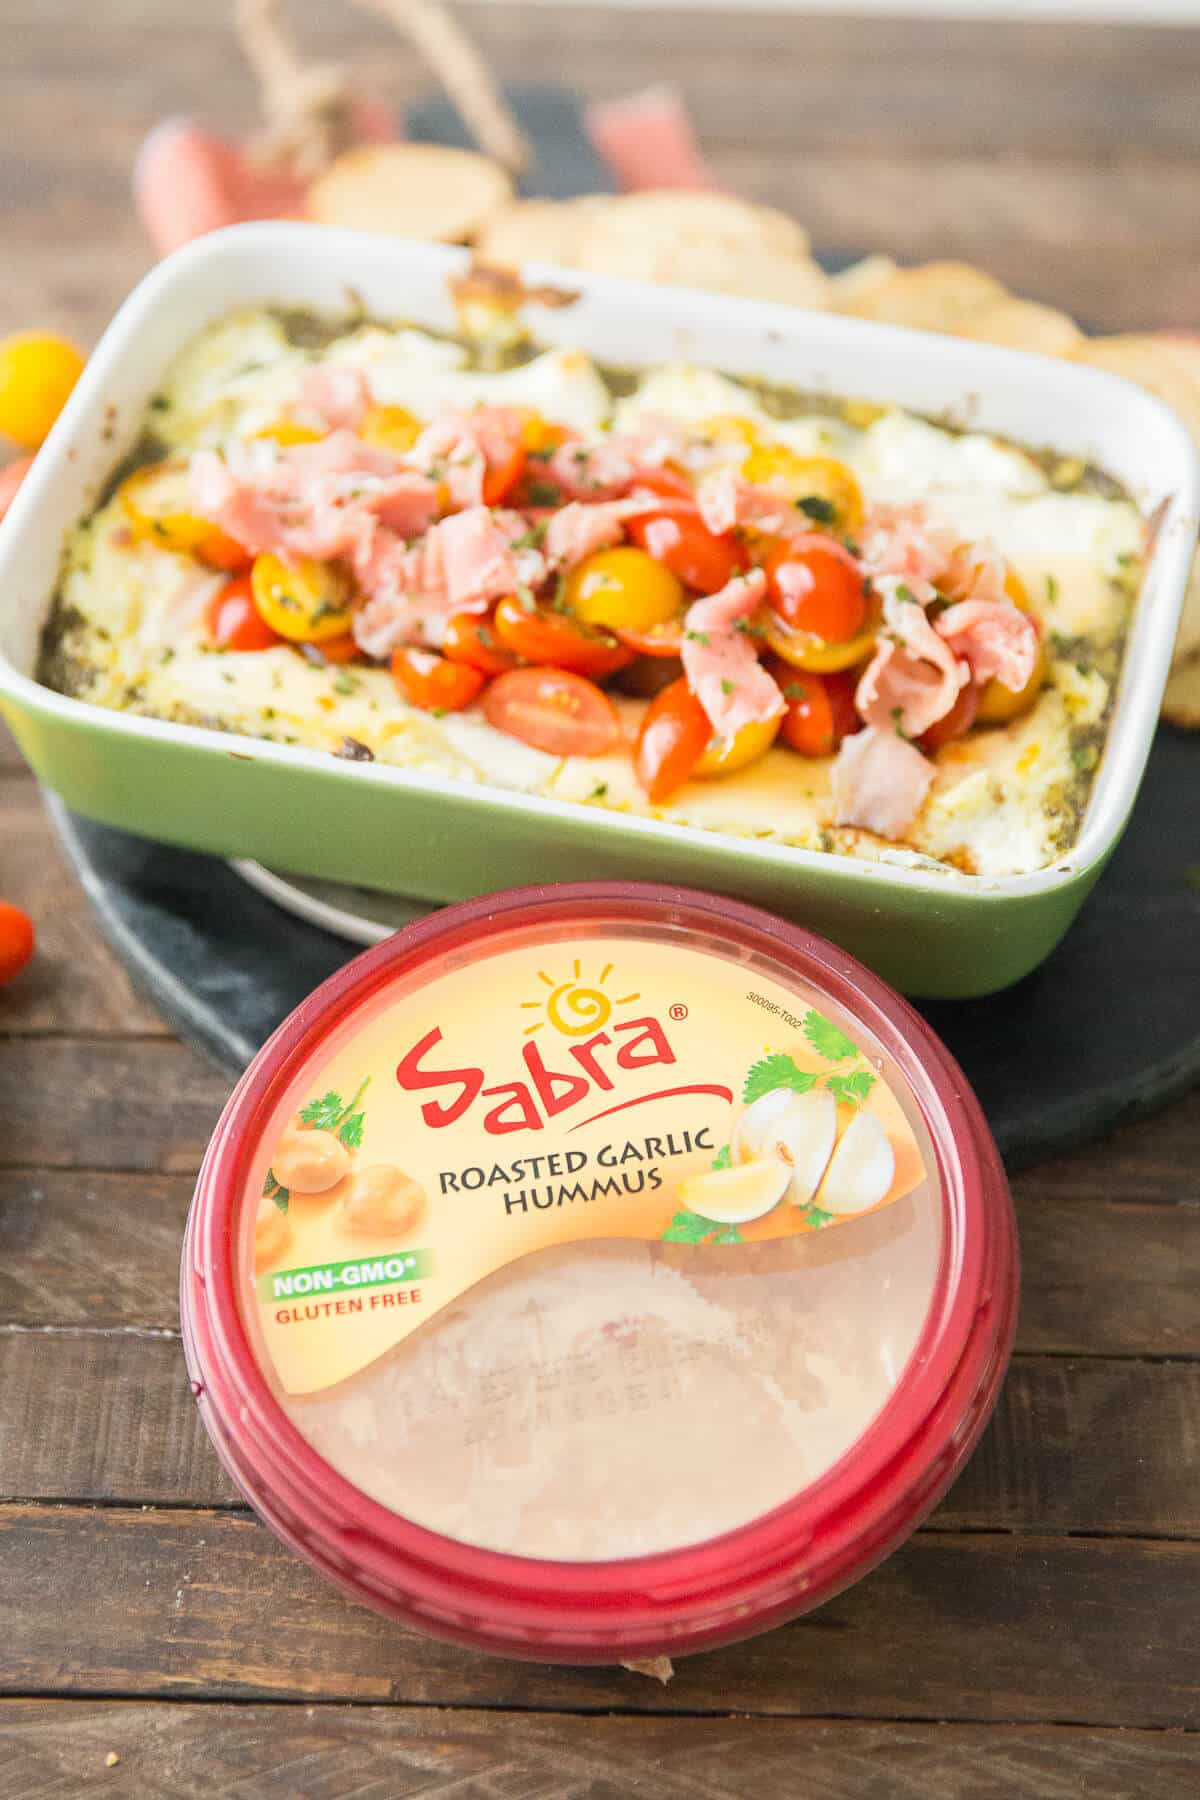 This baked goat cheese dip is so satisfying it's almost a meal! Three layers make this warm dip so delicious!